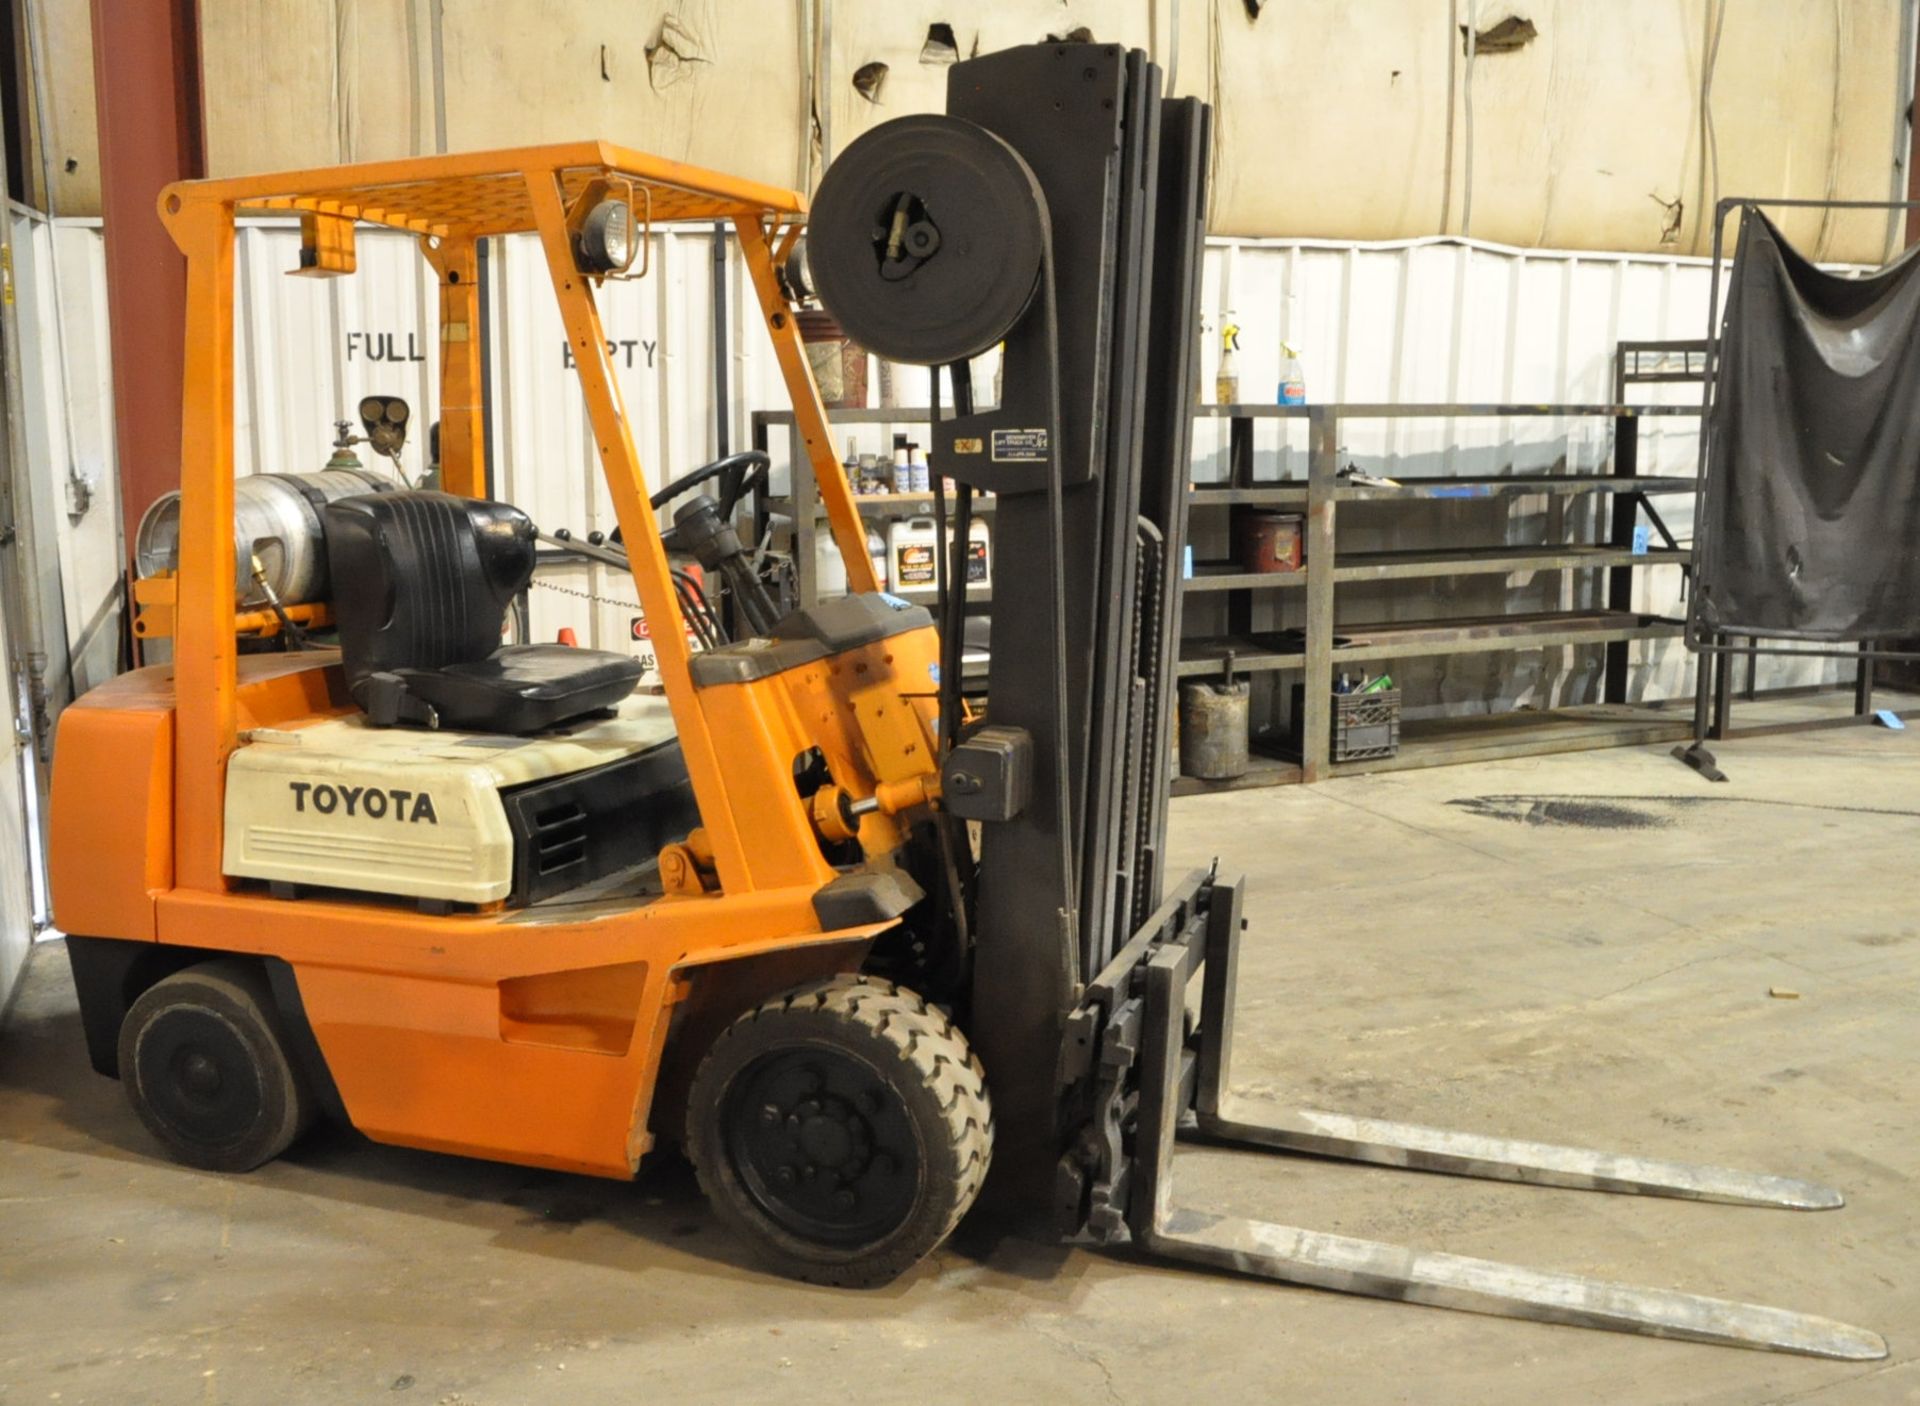 Toyota 6,000-Lbs. x 216" Lift Capacity LP Gas Fork Lift Truck, 2-Stage Mast, Side Shift, 48" Forks - Image 2 of 5